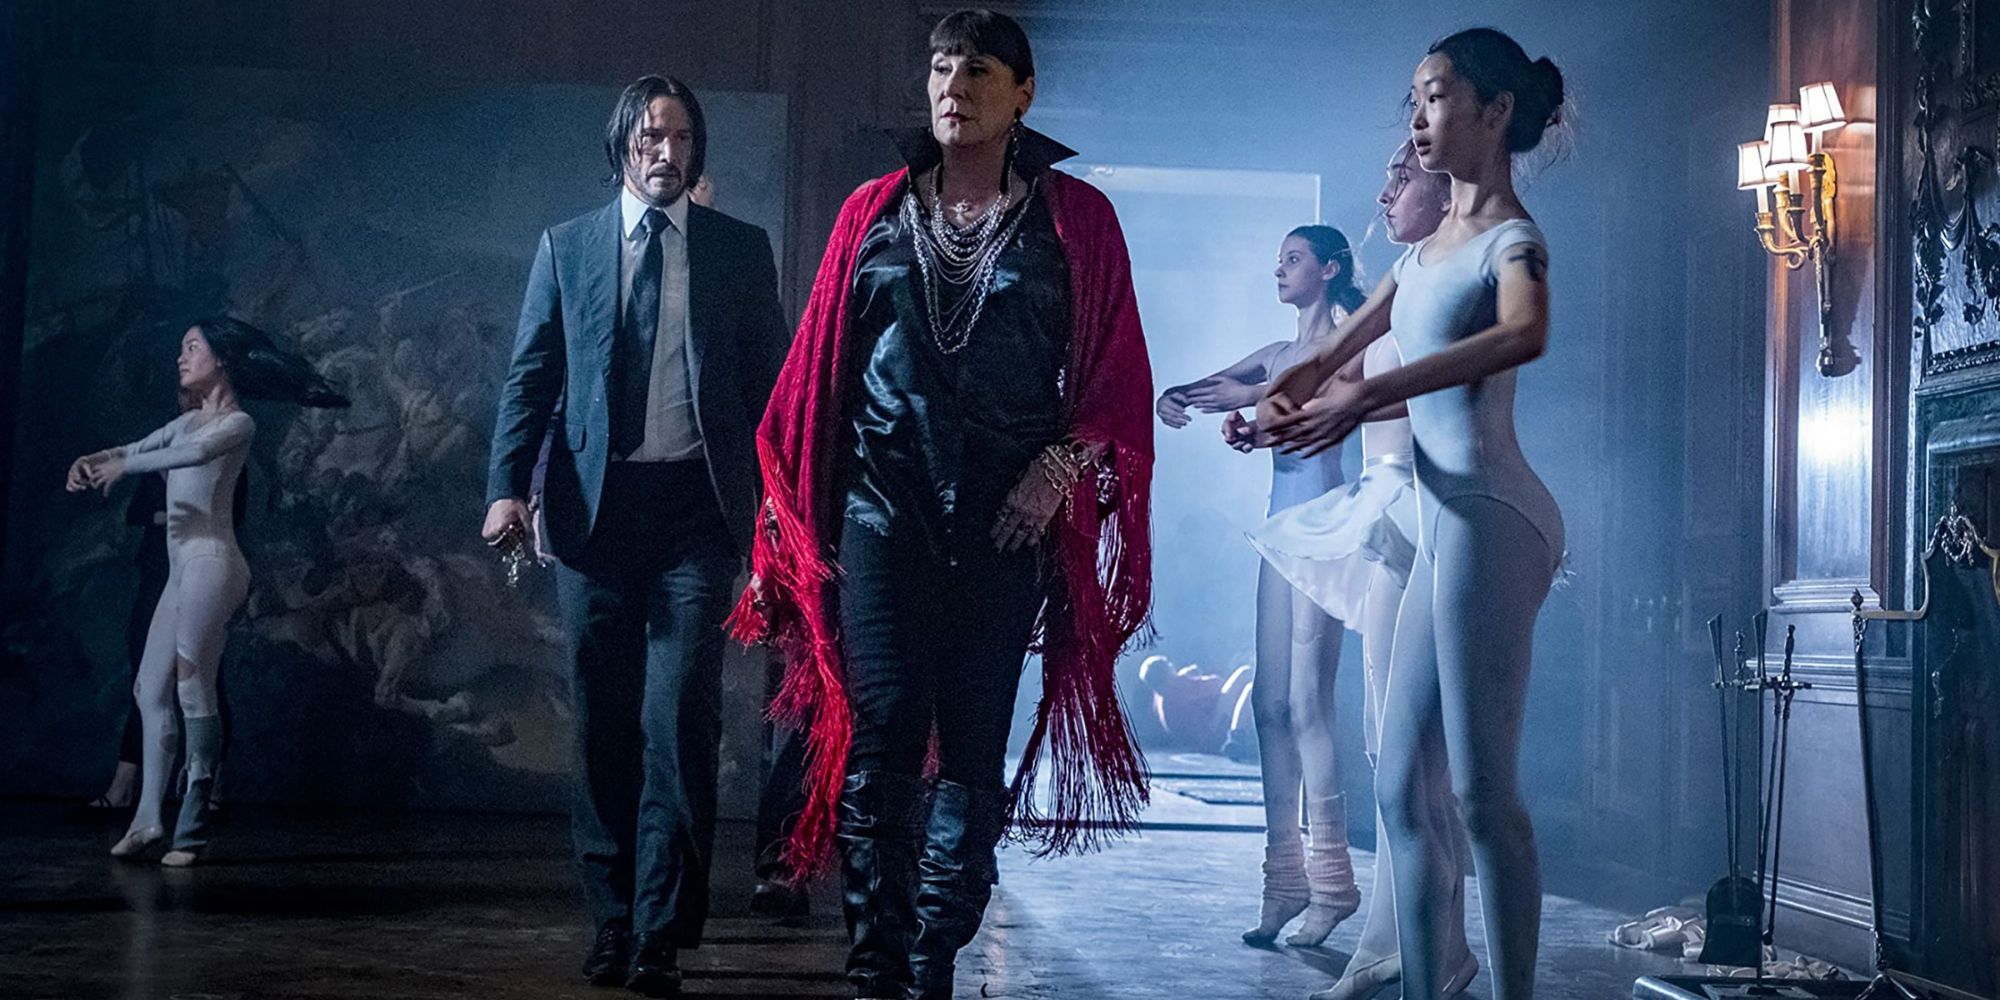 Keanu Reeves as John Wick and Anjelica Huston as The Director walk past ballerinas in John Wick: Chapter 3 - Parabellum.